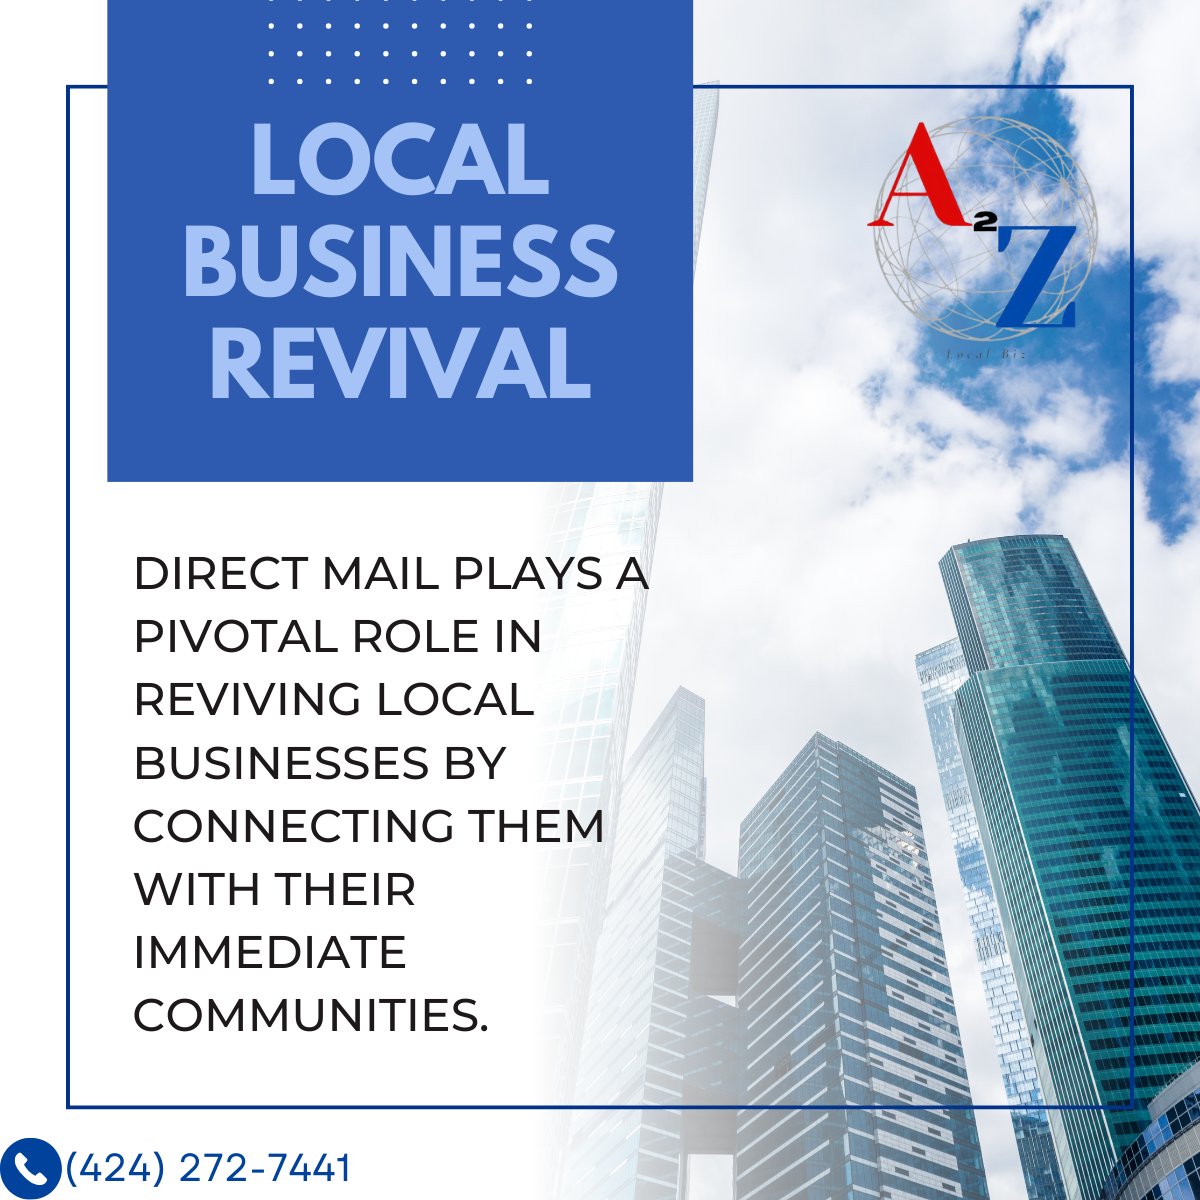 Revive local businesses with a personal touch! Direct mail connects local businesses with their communities, fostering growth and support. 📬🏪 #LocalSupport #CommunityRevival #OrangeCounty #Anaheim